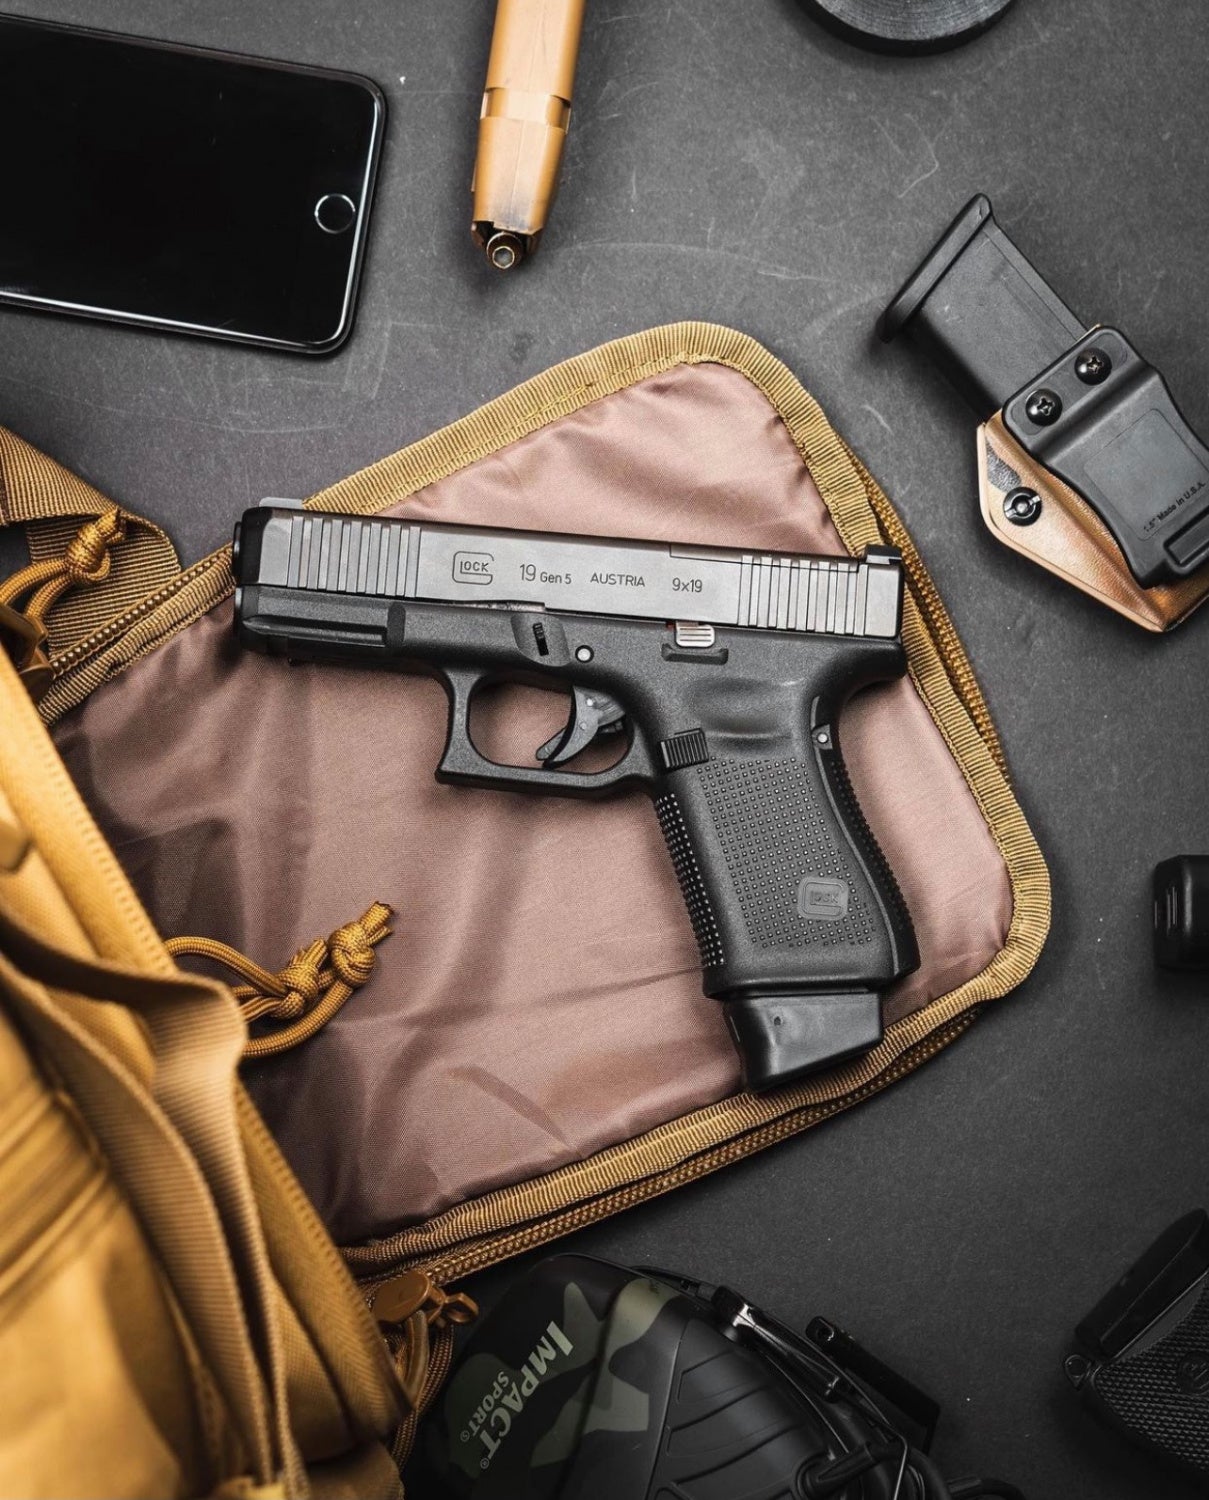 The Top Selling Guns for September 2021 - Did your Gat Make the Cut?